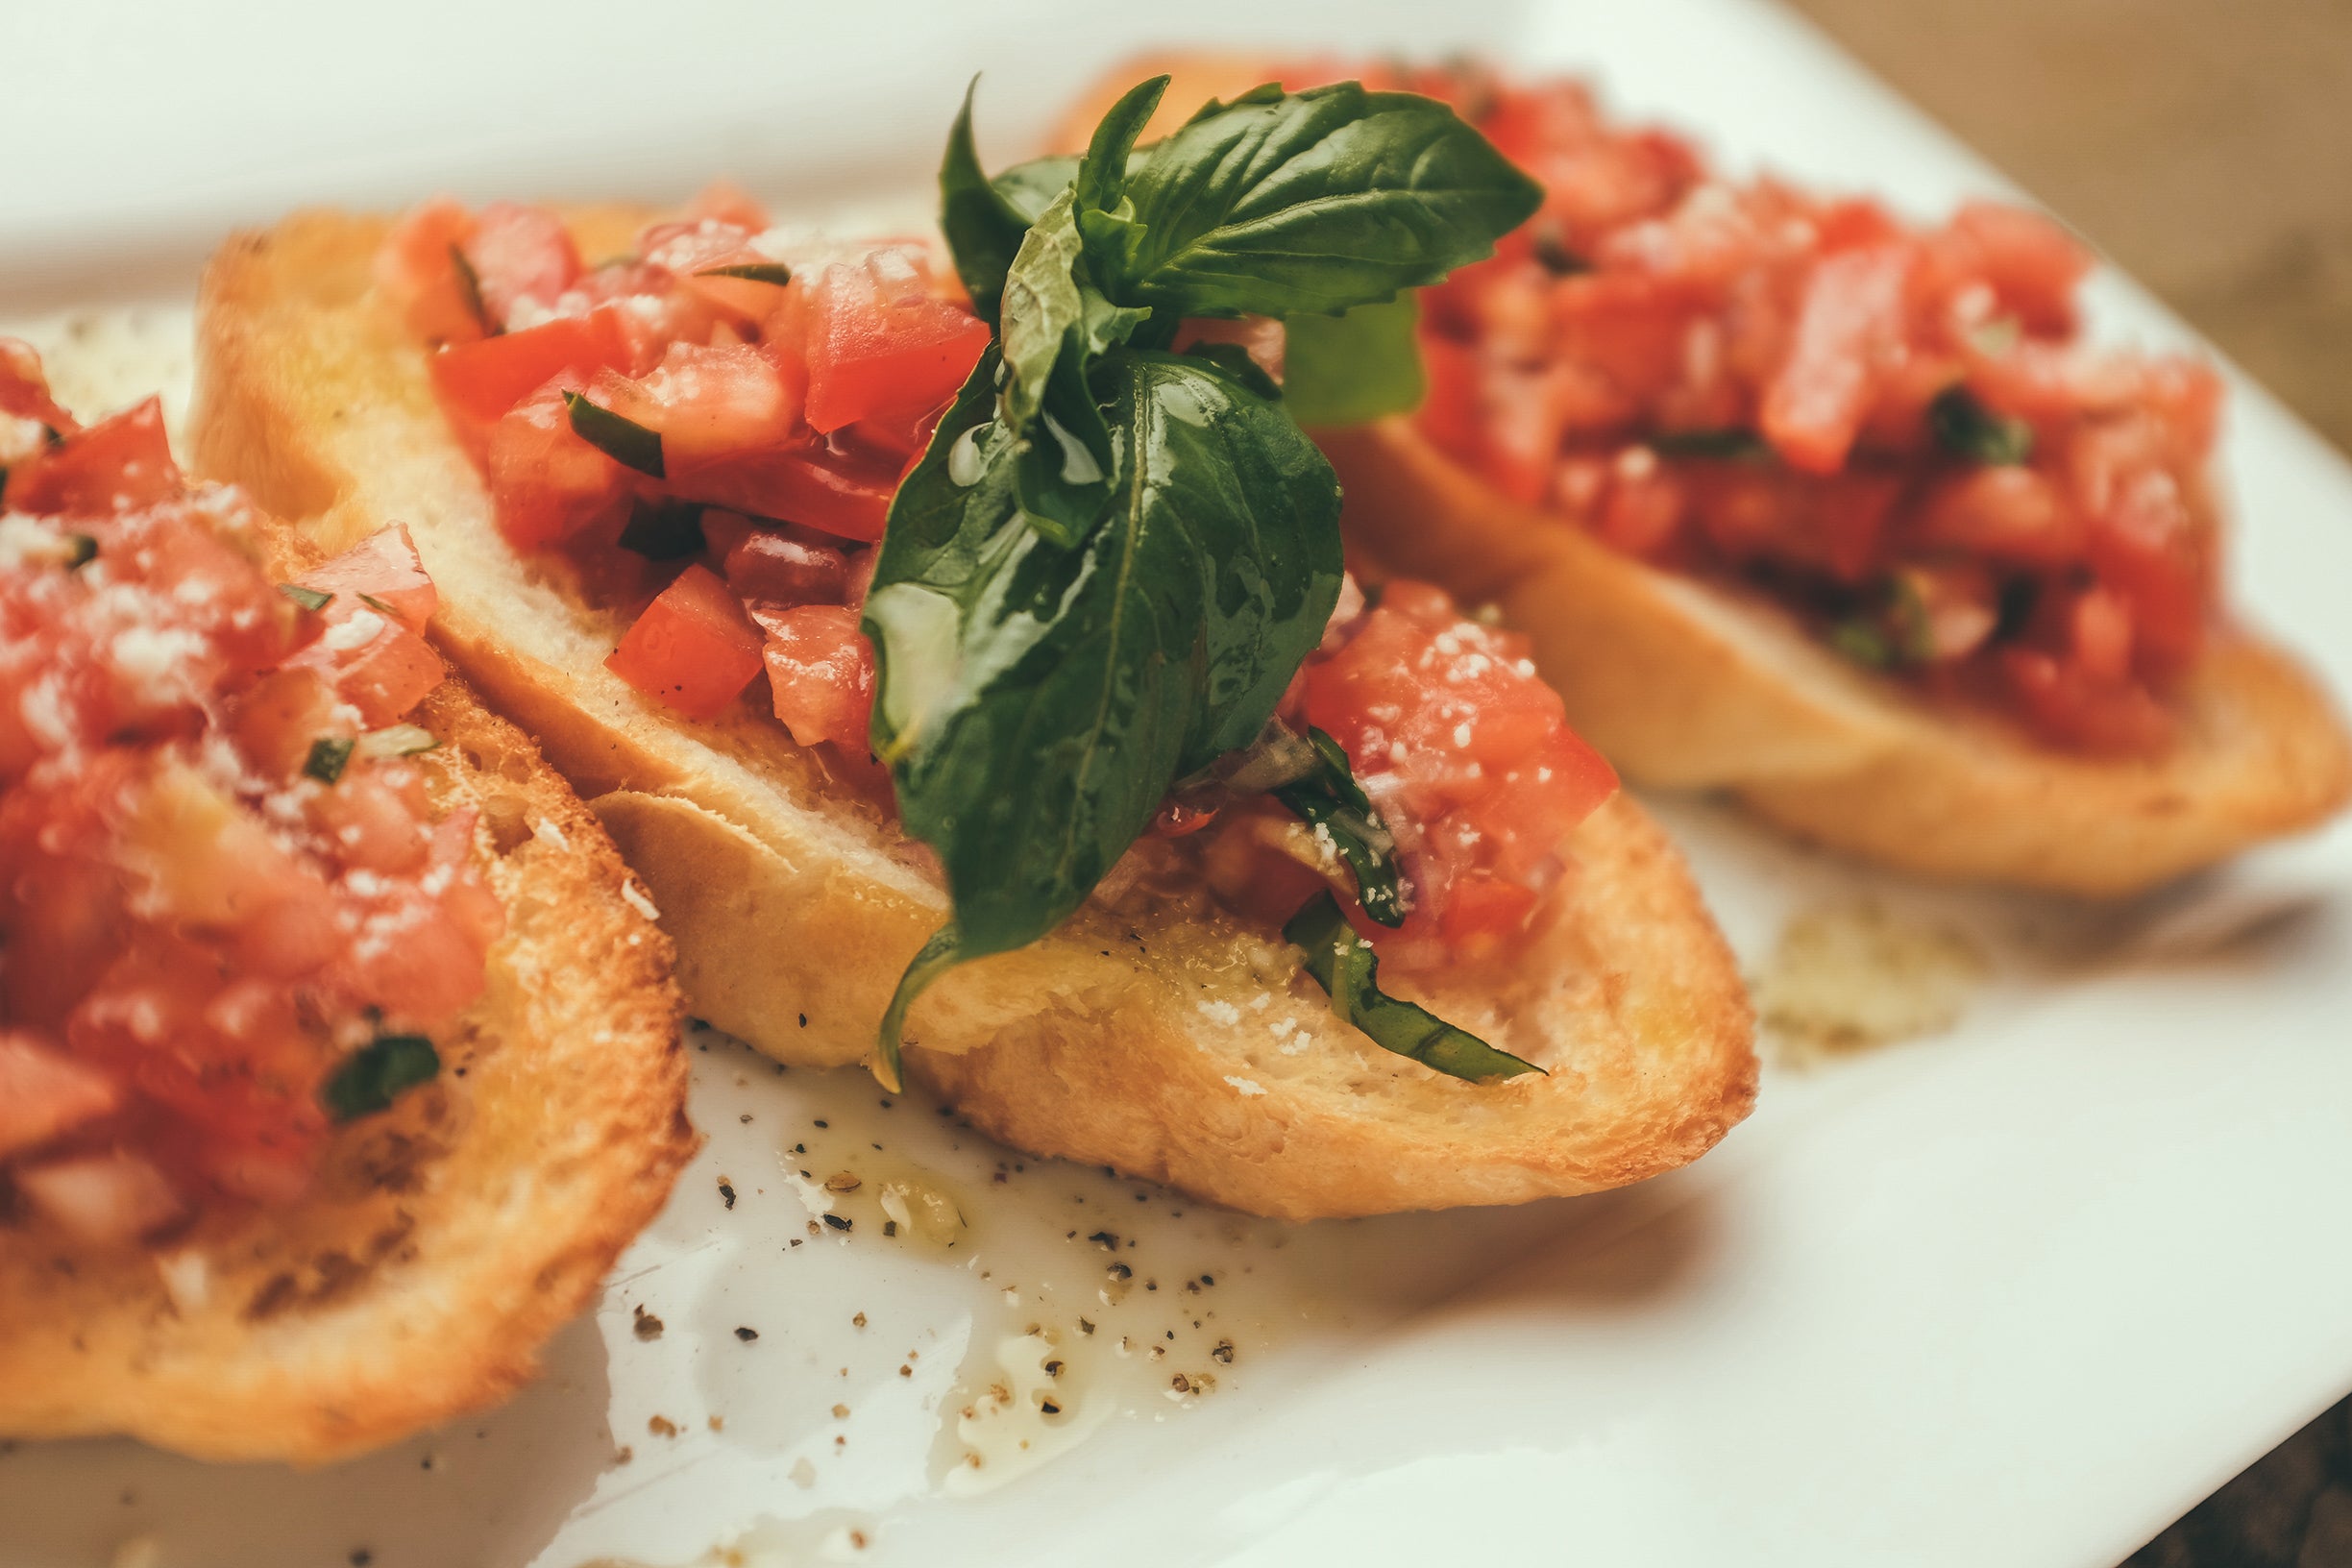 Italian Bruschetta is a simple and flavorful appetizer made with toasted bread, fresh tomatoes, garlic, and olive oil.